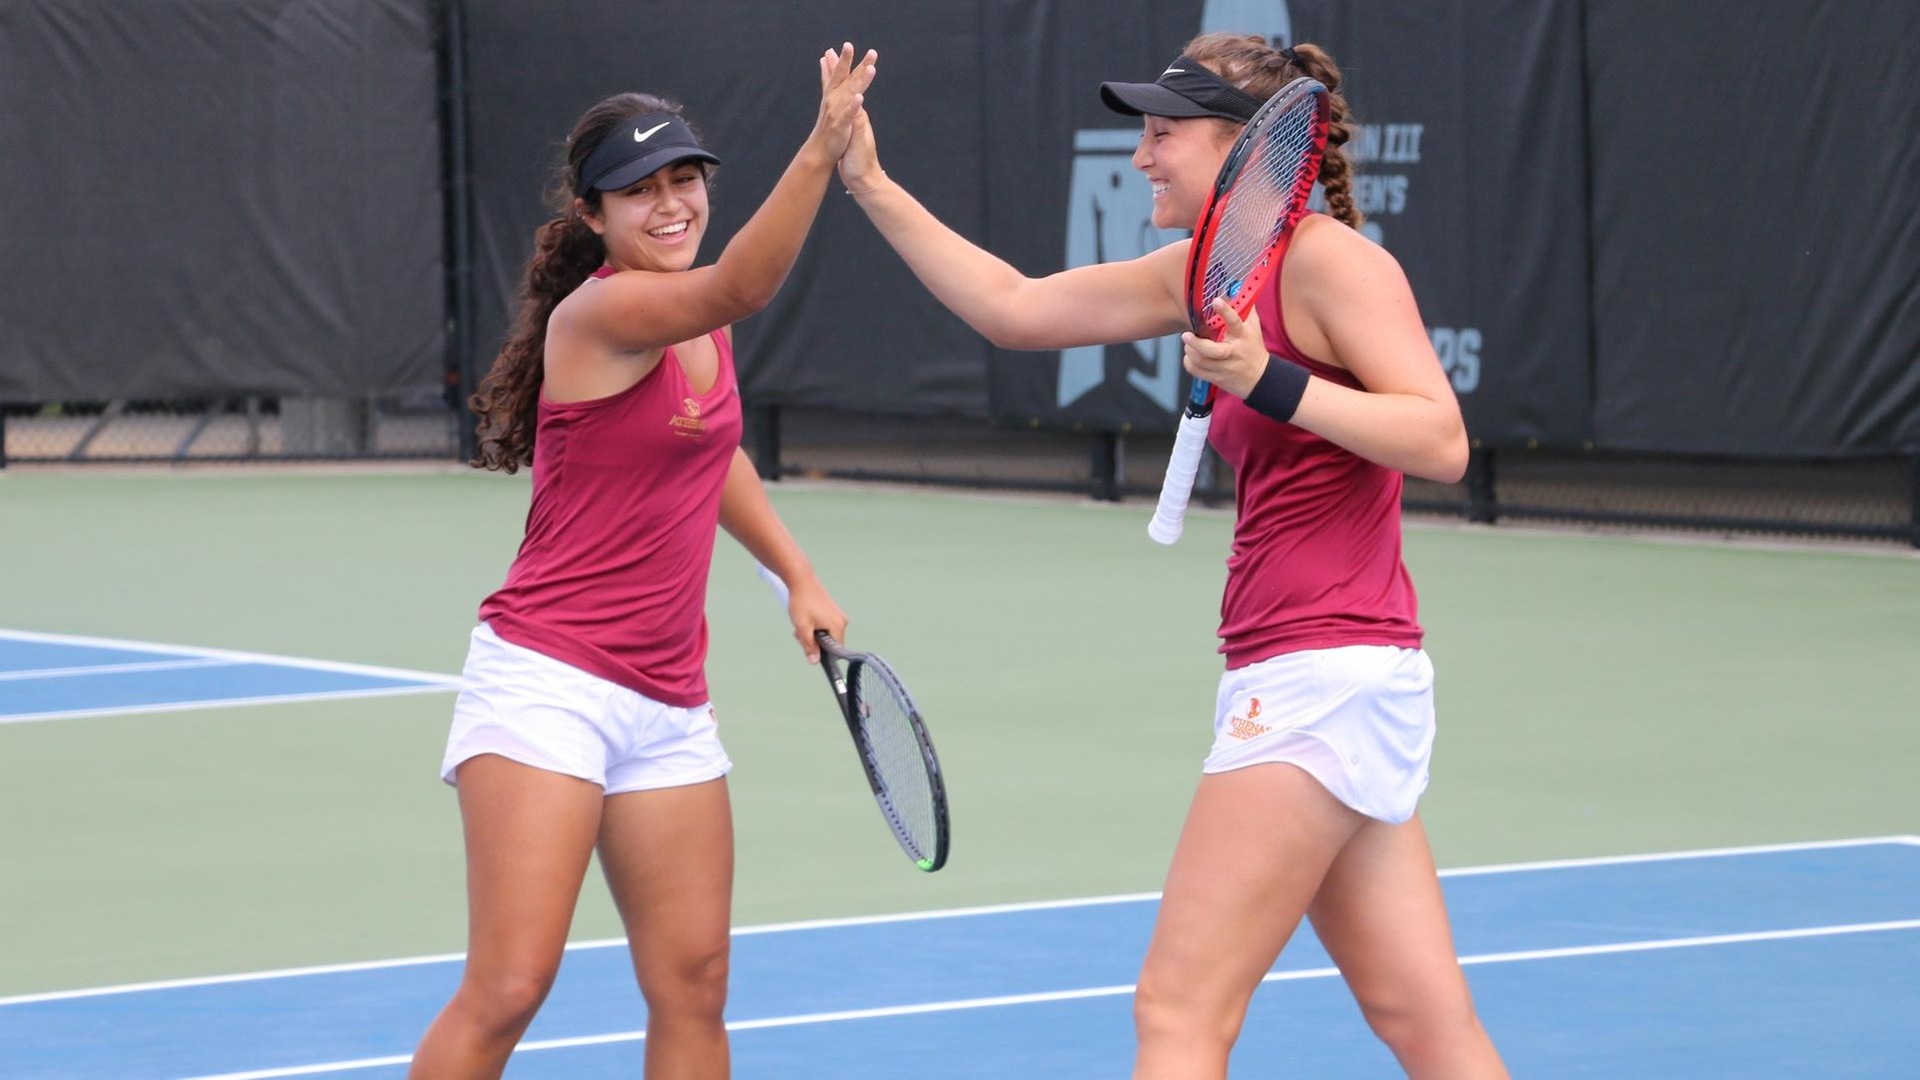 Sarah Bahsoun and Devon Wolfe celebrate a point on their way to an 8-1 win